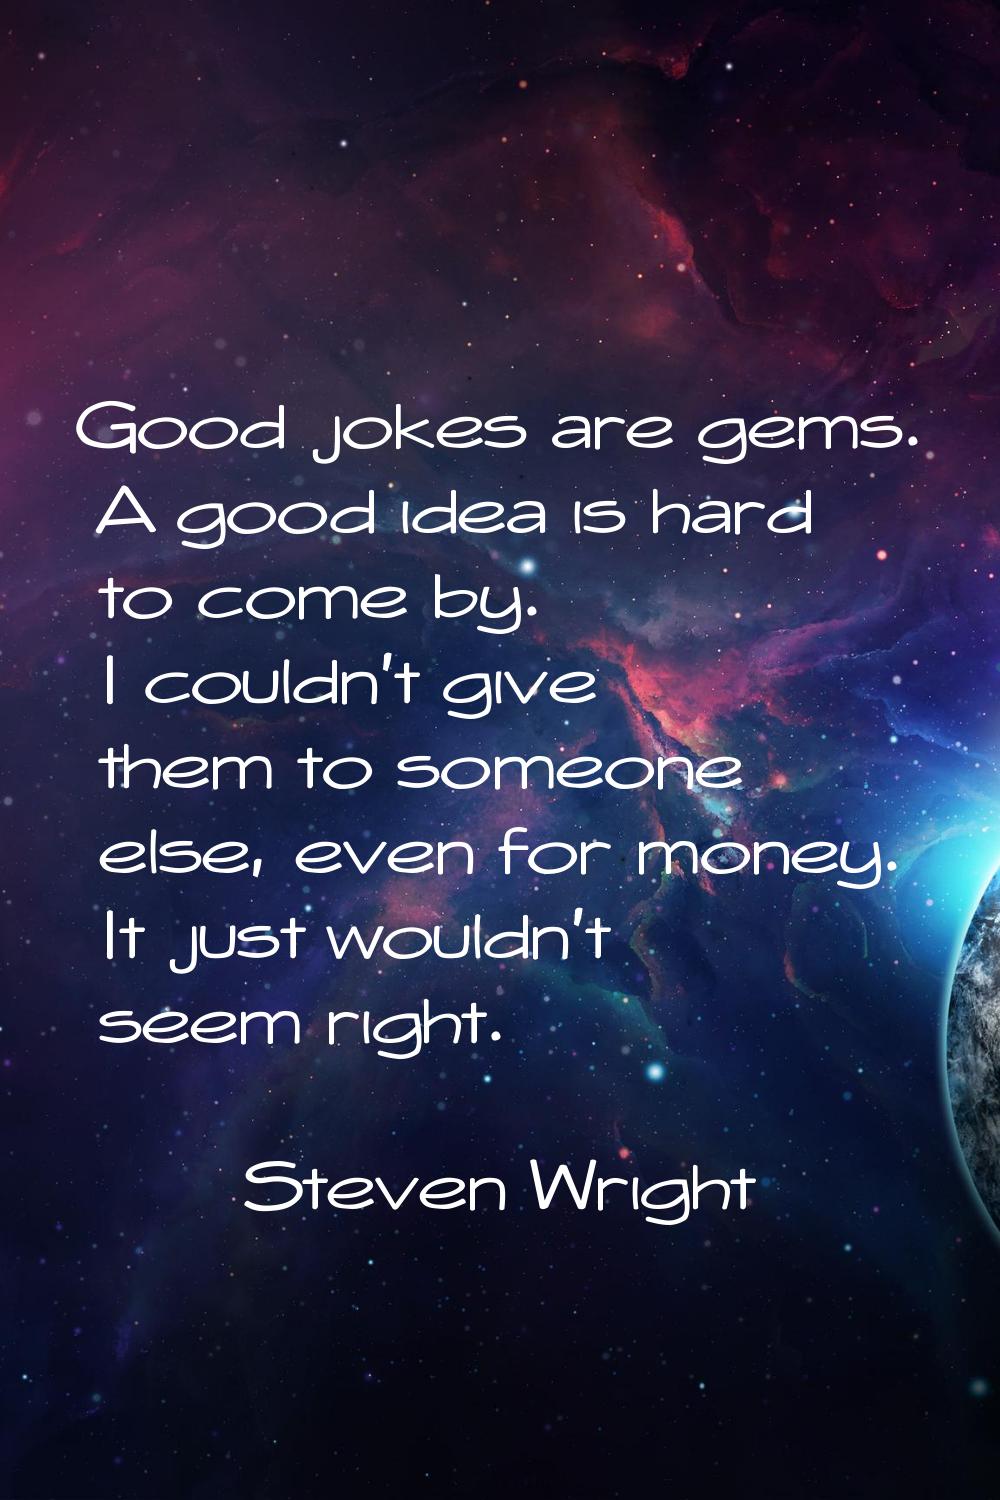 Good jokes are gems. A good idea is hard to come by. I couldn't give them to someone else, even for